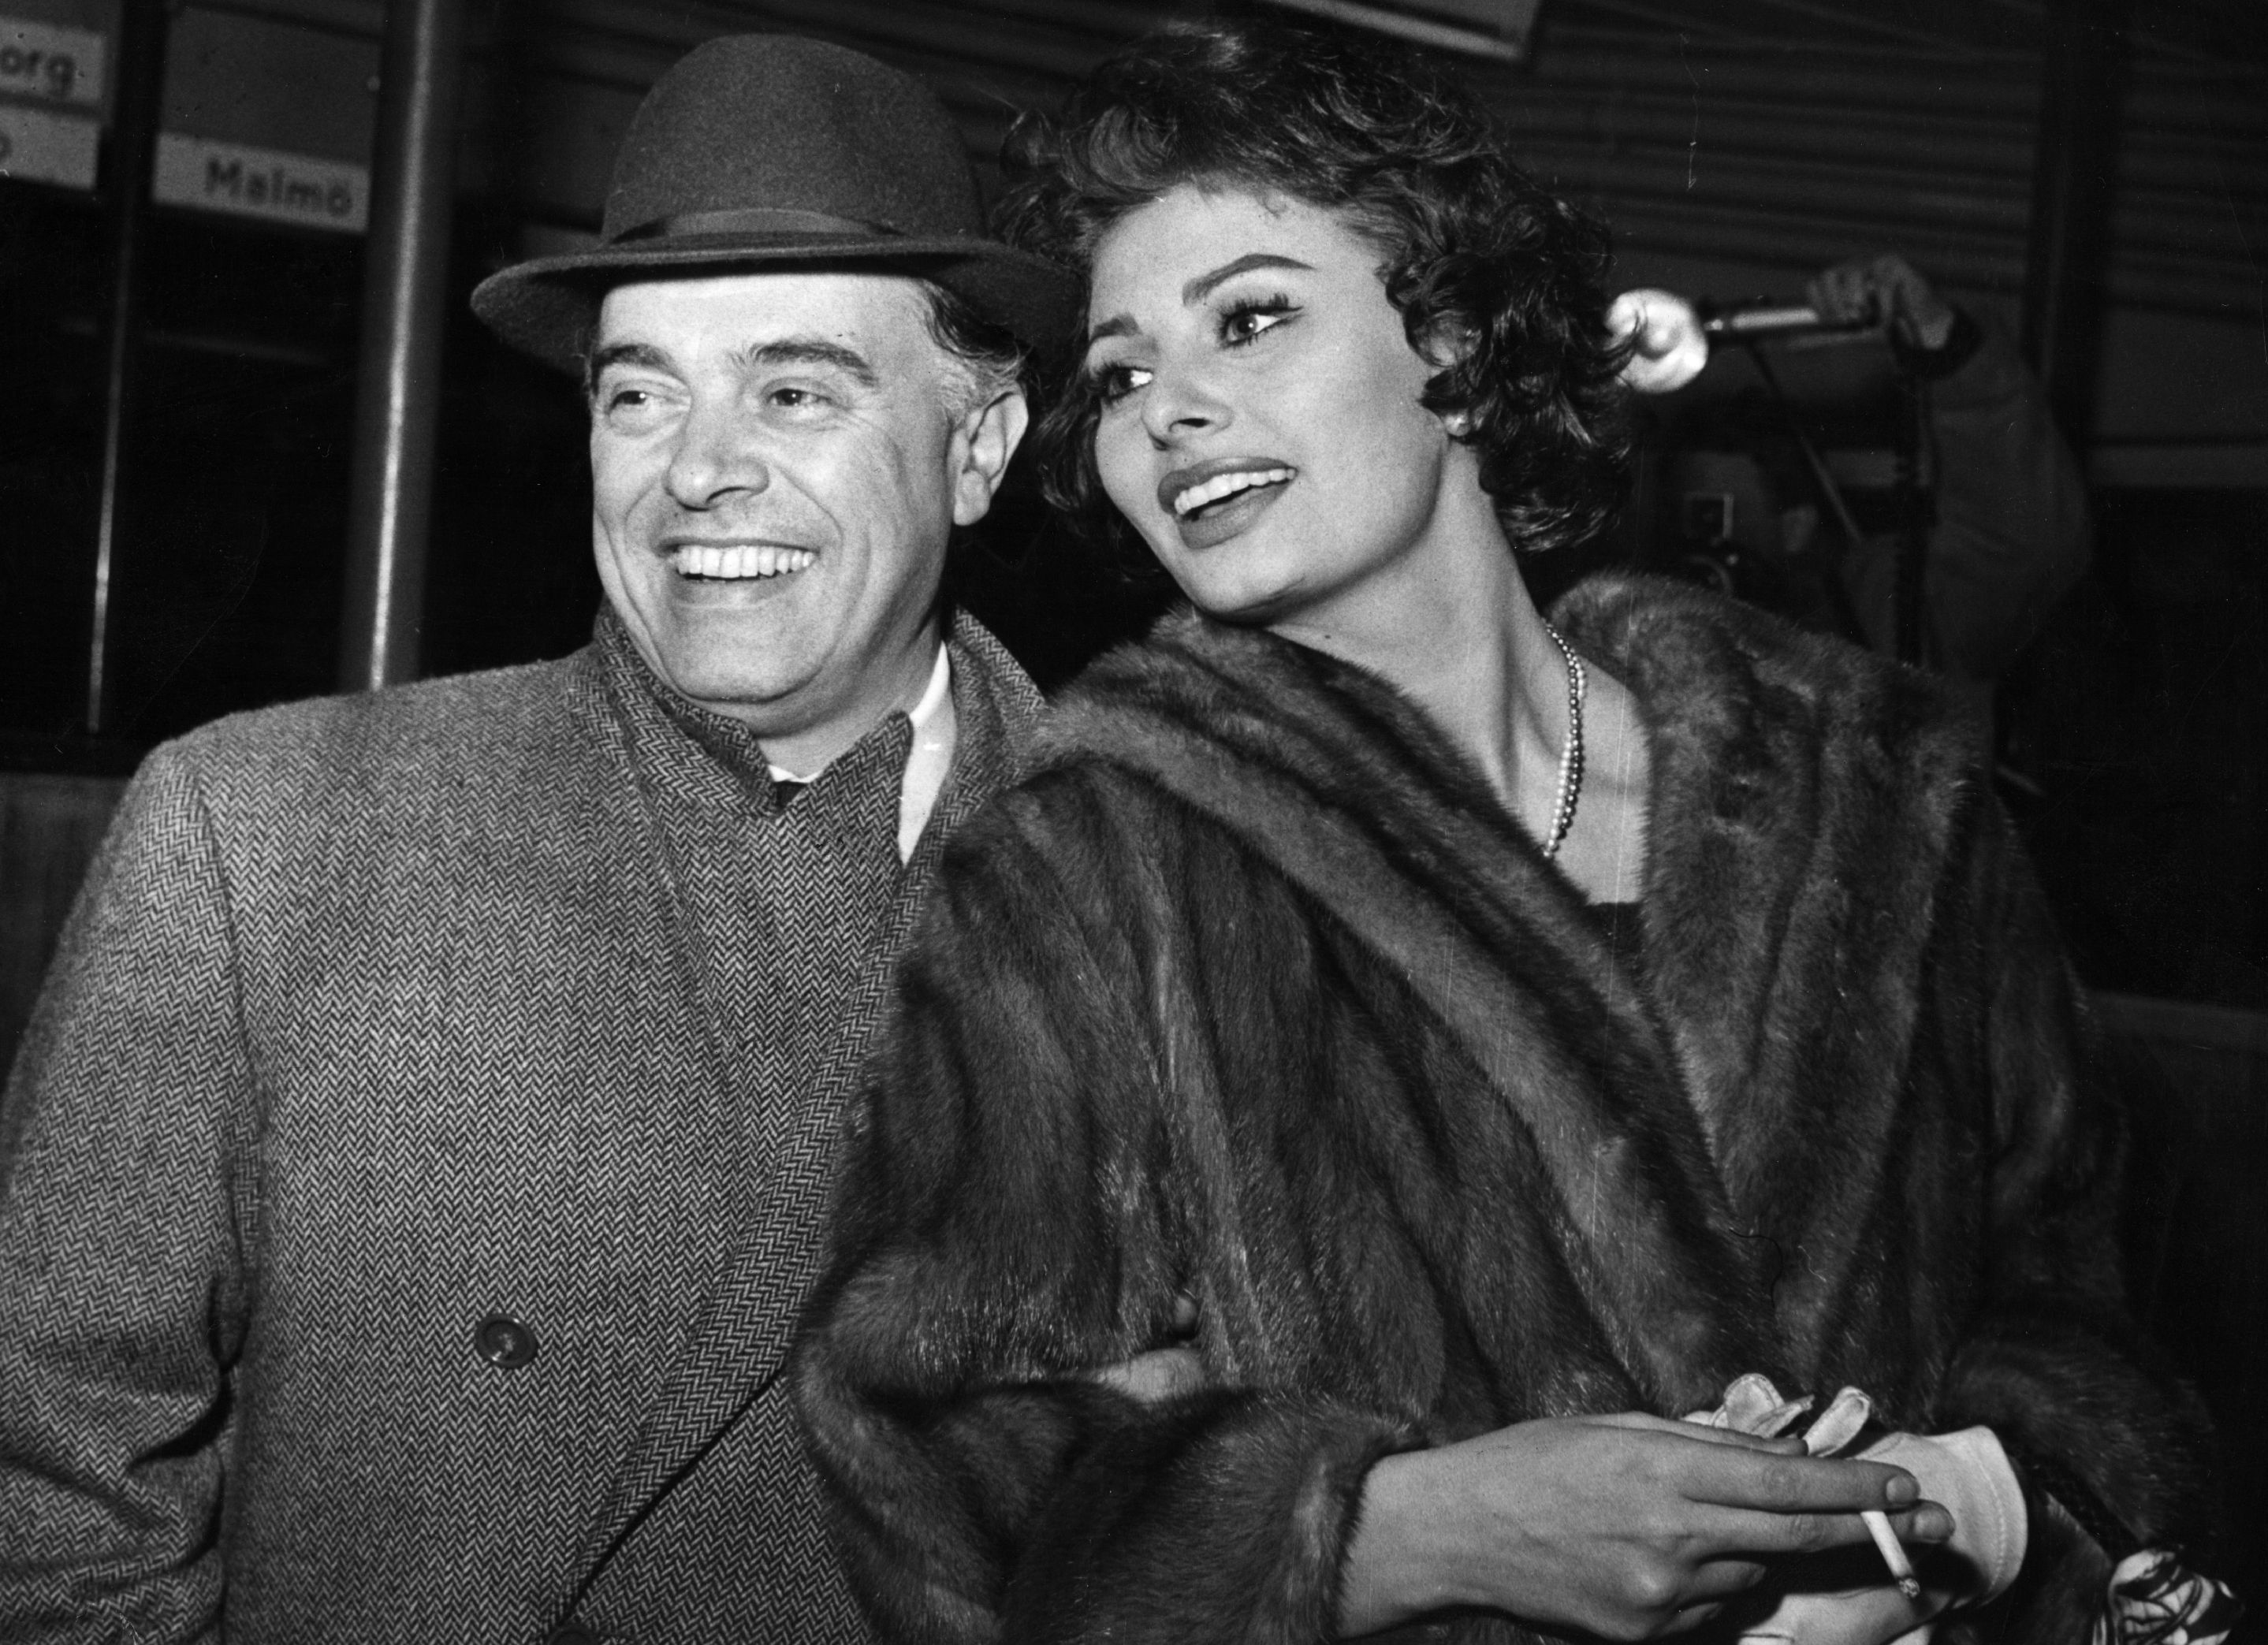 Film director Carlo Ponti and his wife actress Sophia Loren pictured arriving in Copenhagen on January 23, 1958 | Source: Getty Images